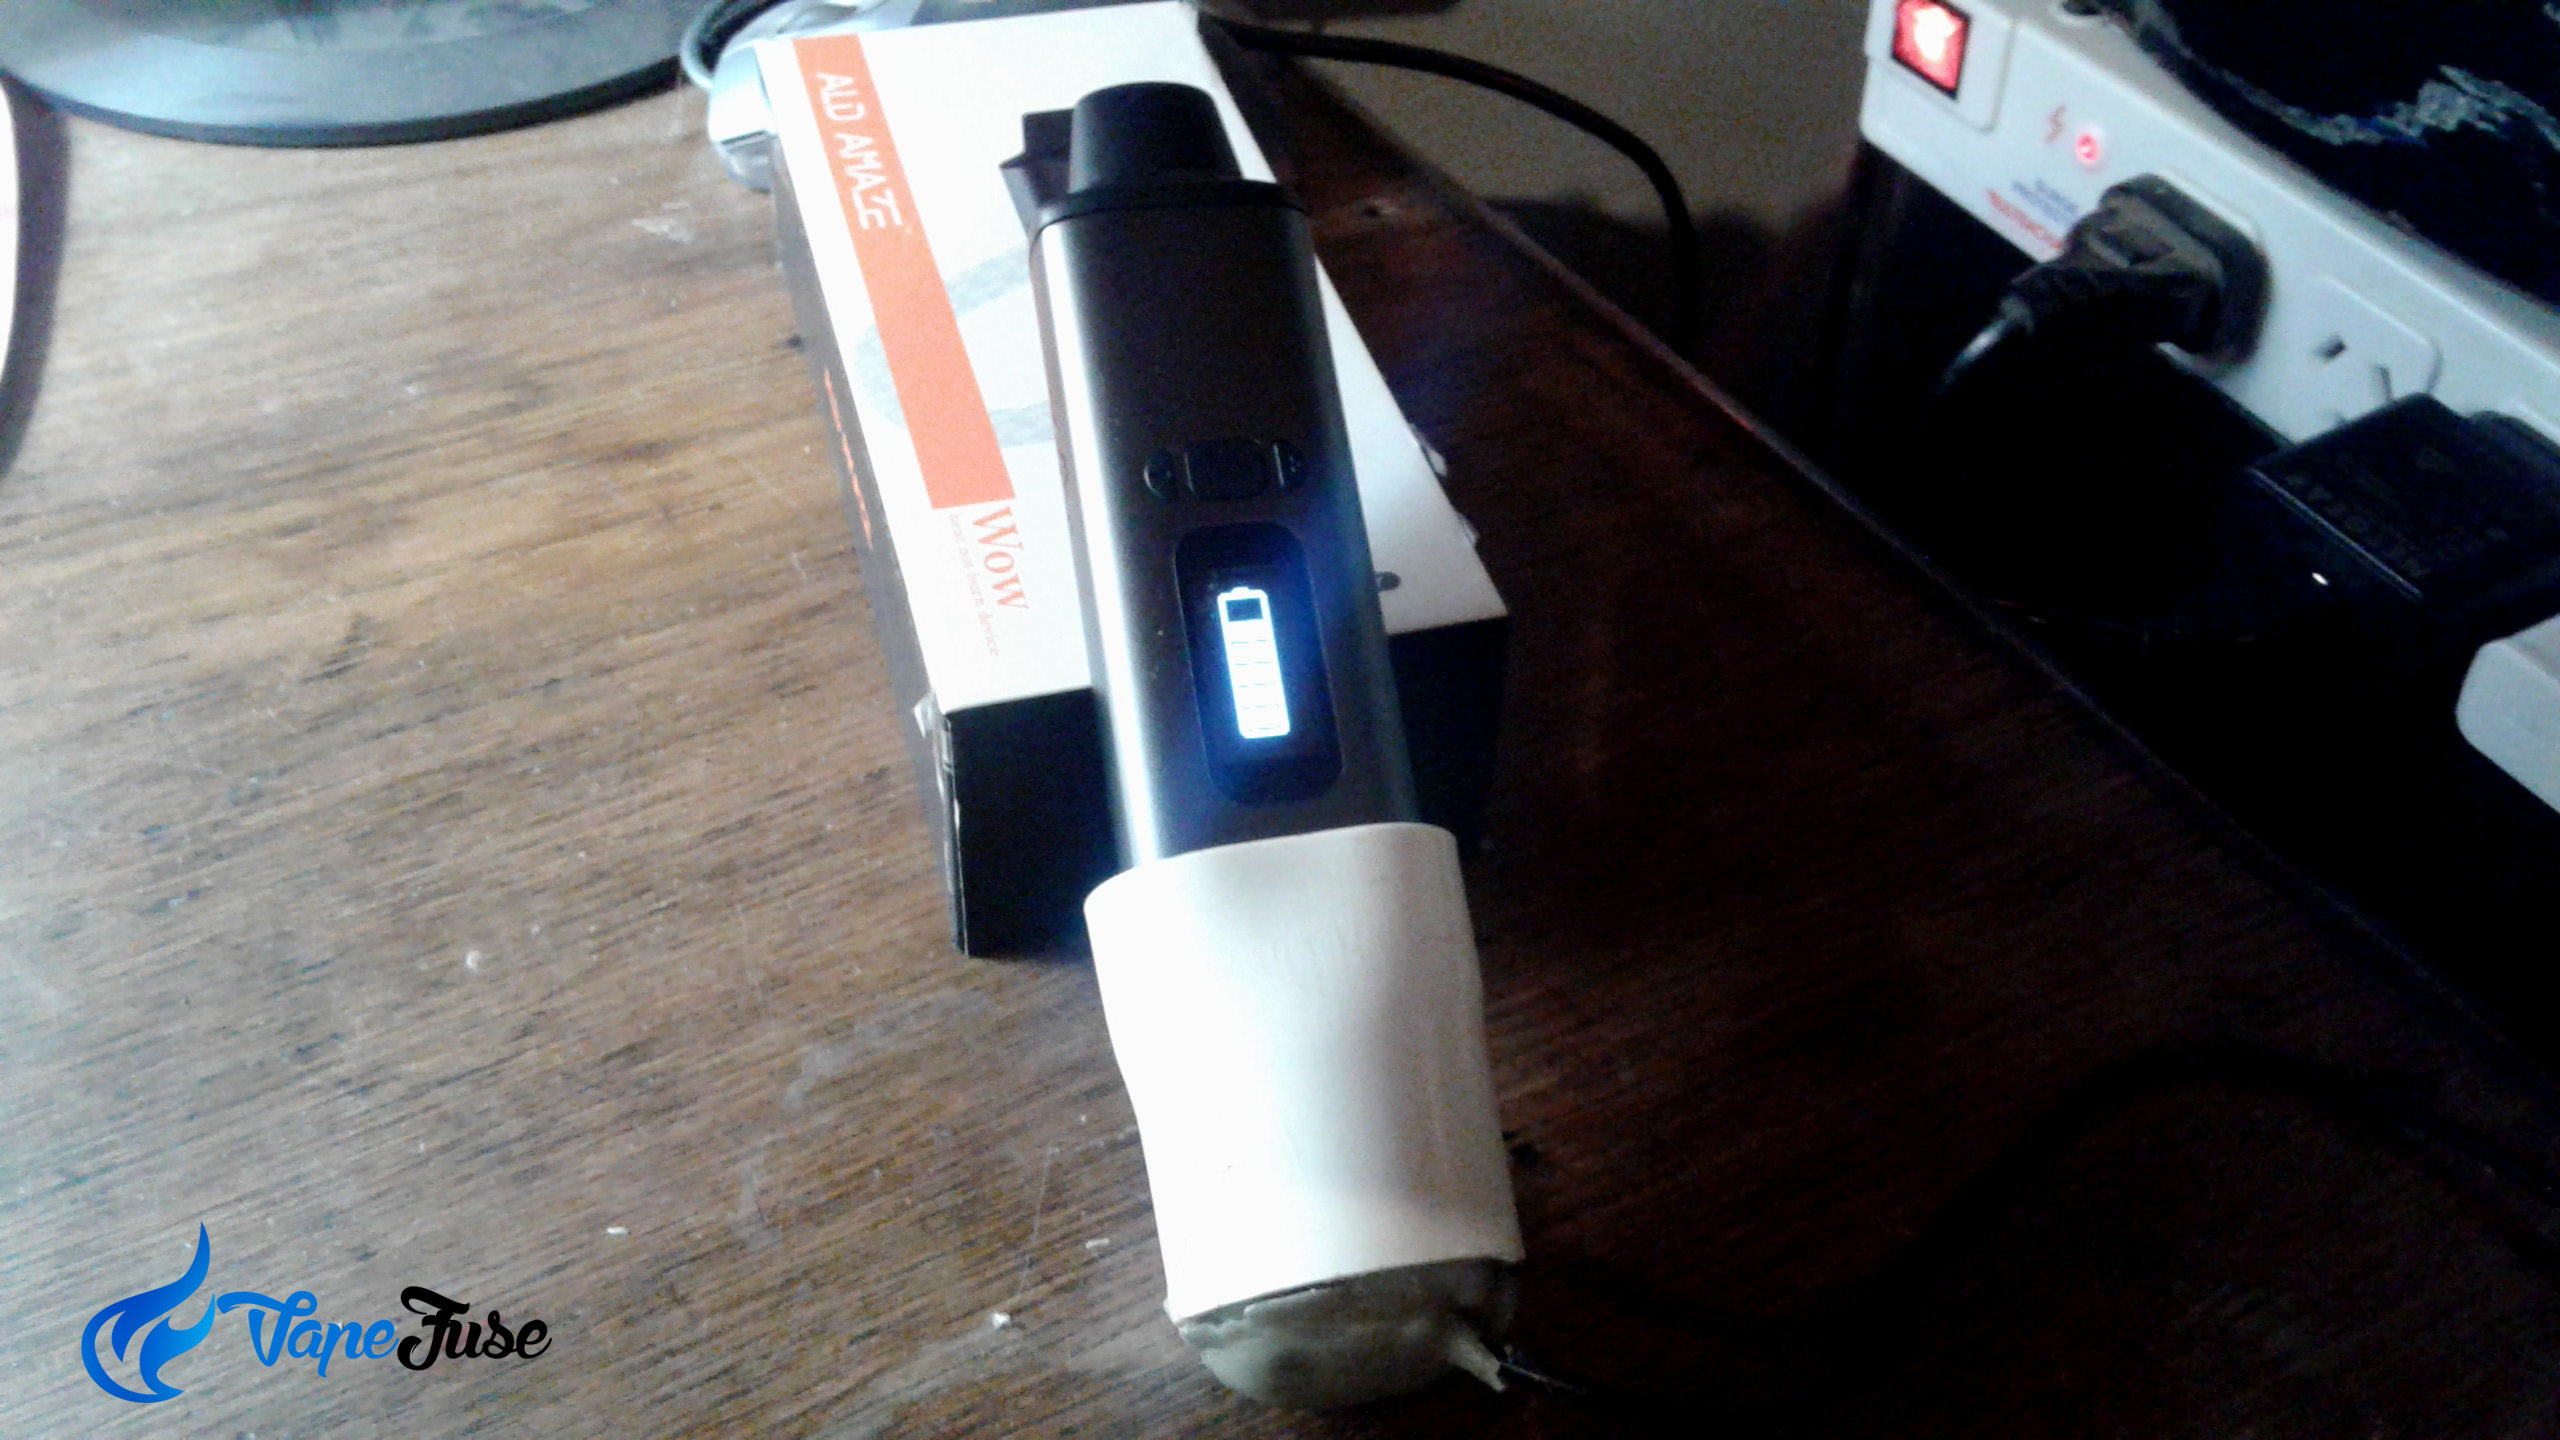 Faulty dry herb vaporizer